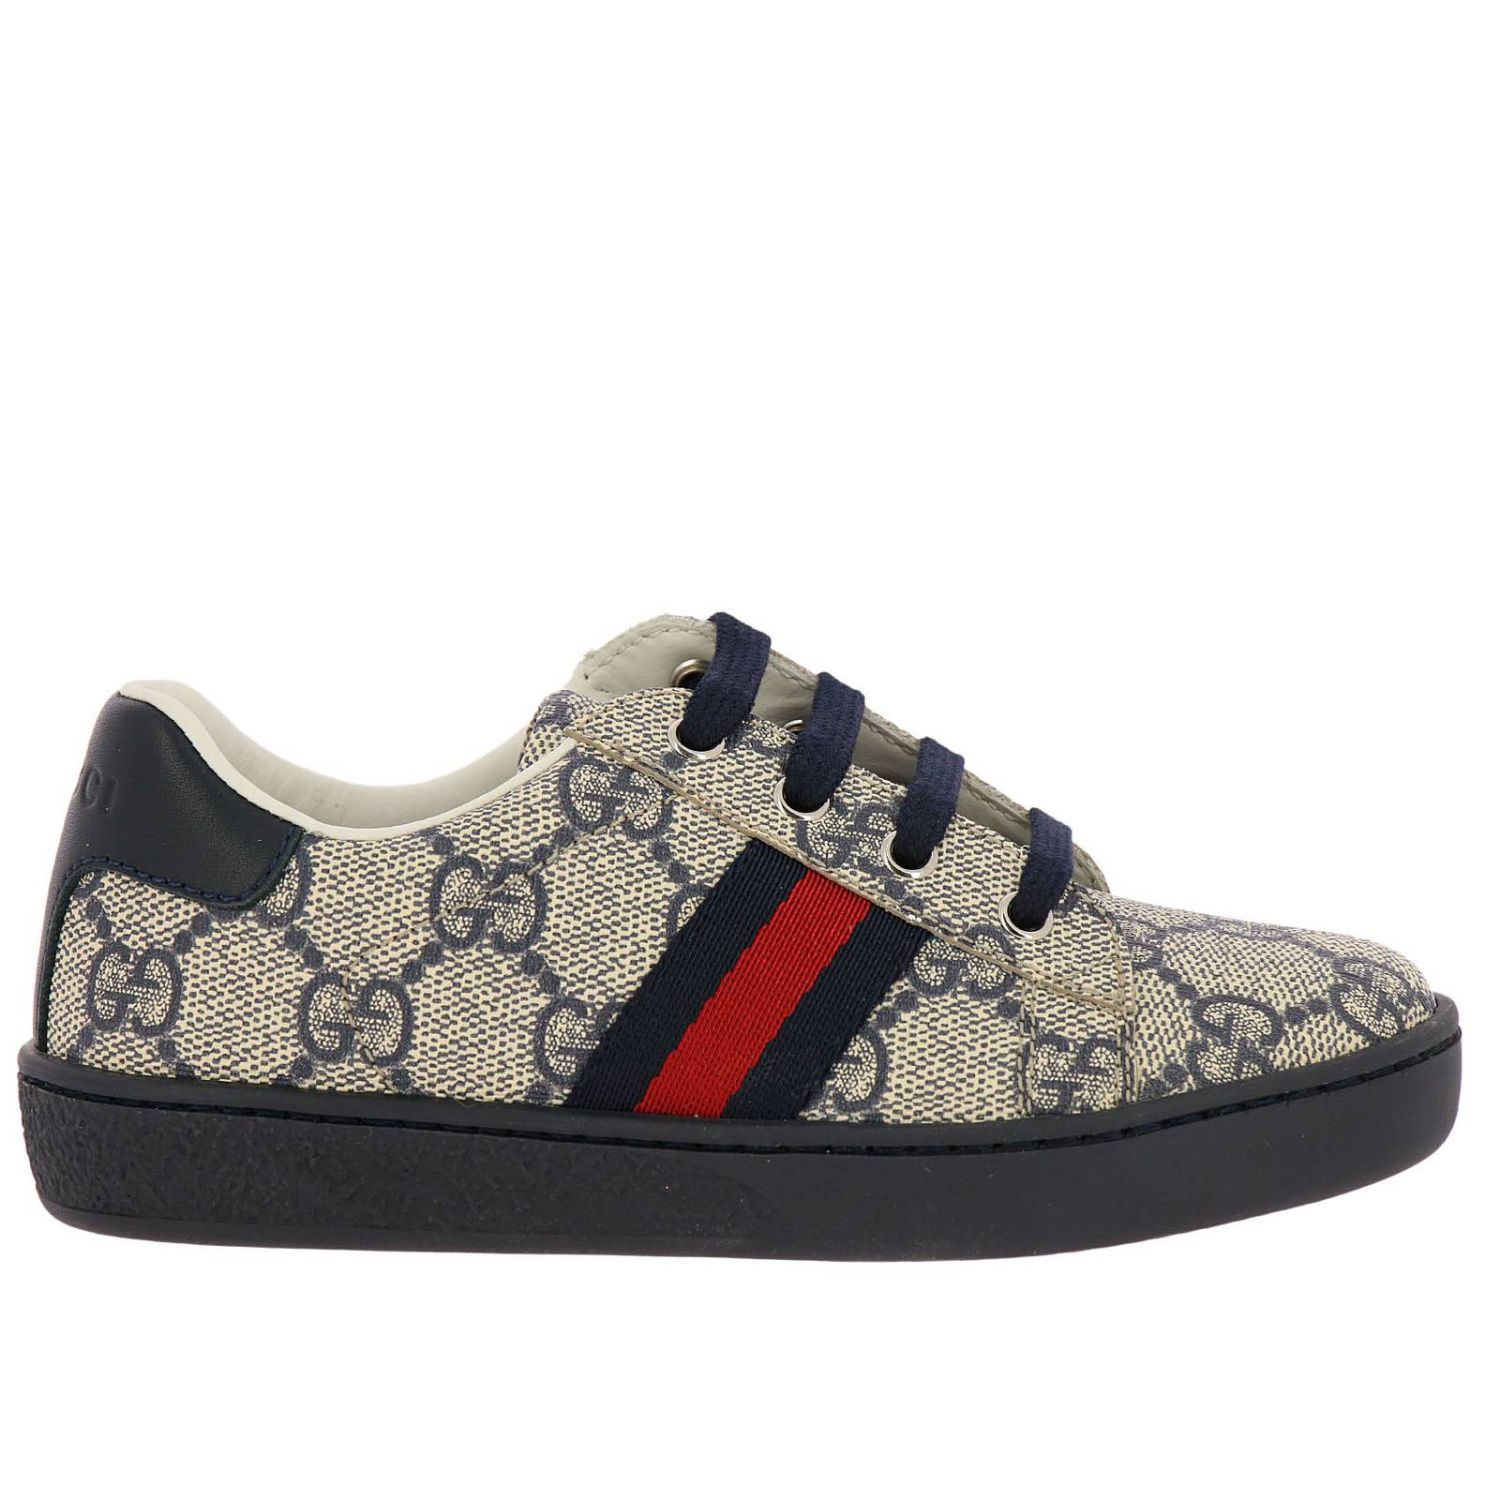 New Ace sneakers in leather with GG Supreme Gucci print and web bands ...